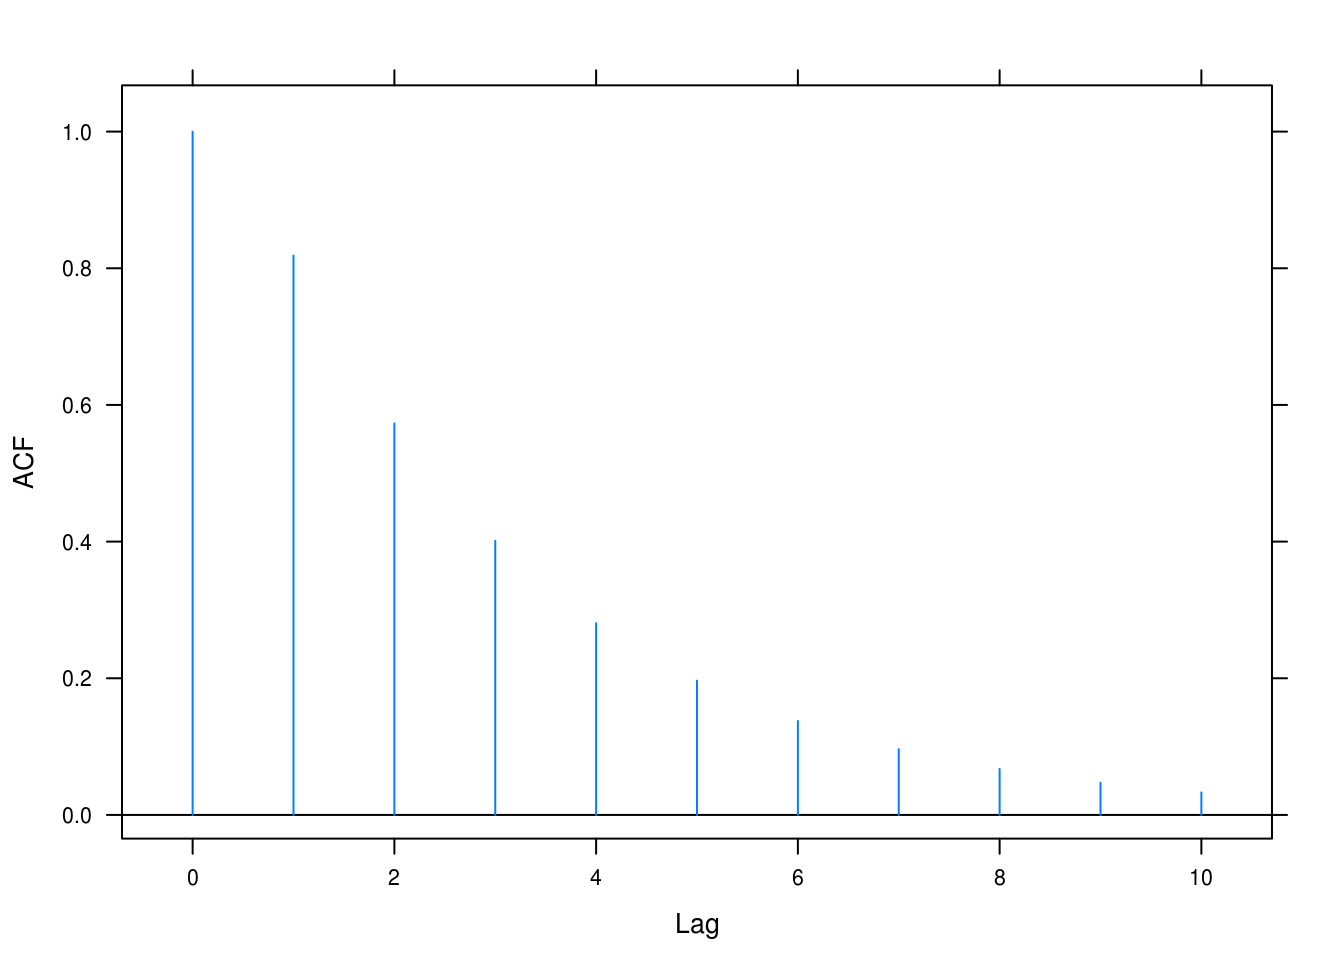 ACF for ARMA(1,1) with $\phi = 0.7$ and $\theta = -0.4$.